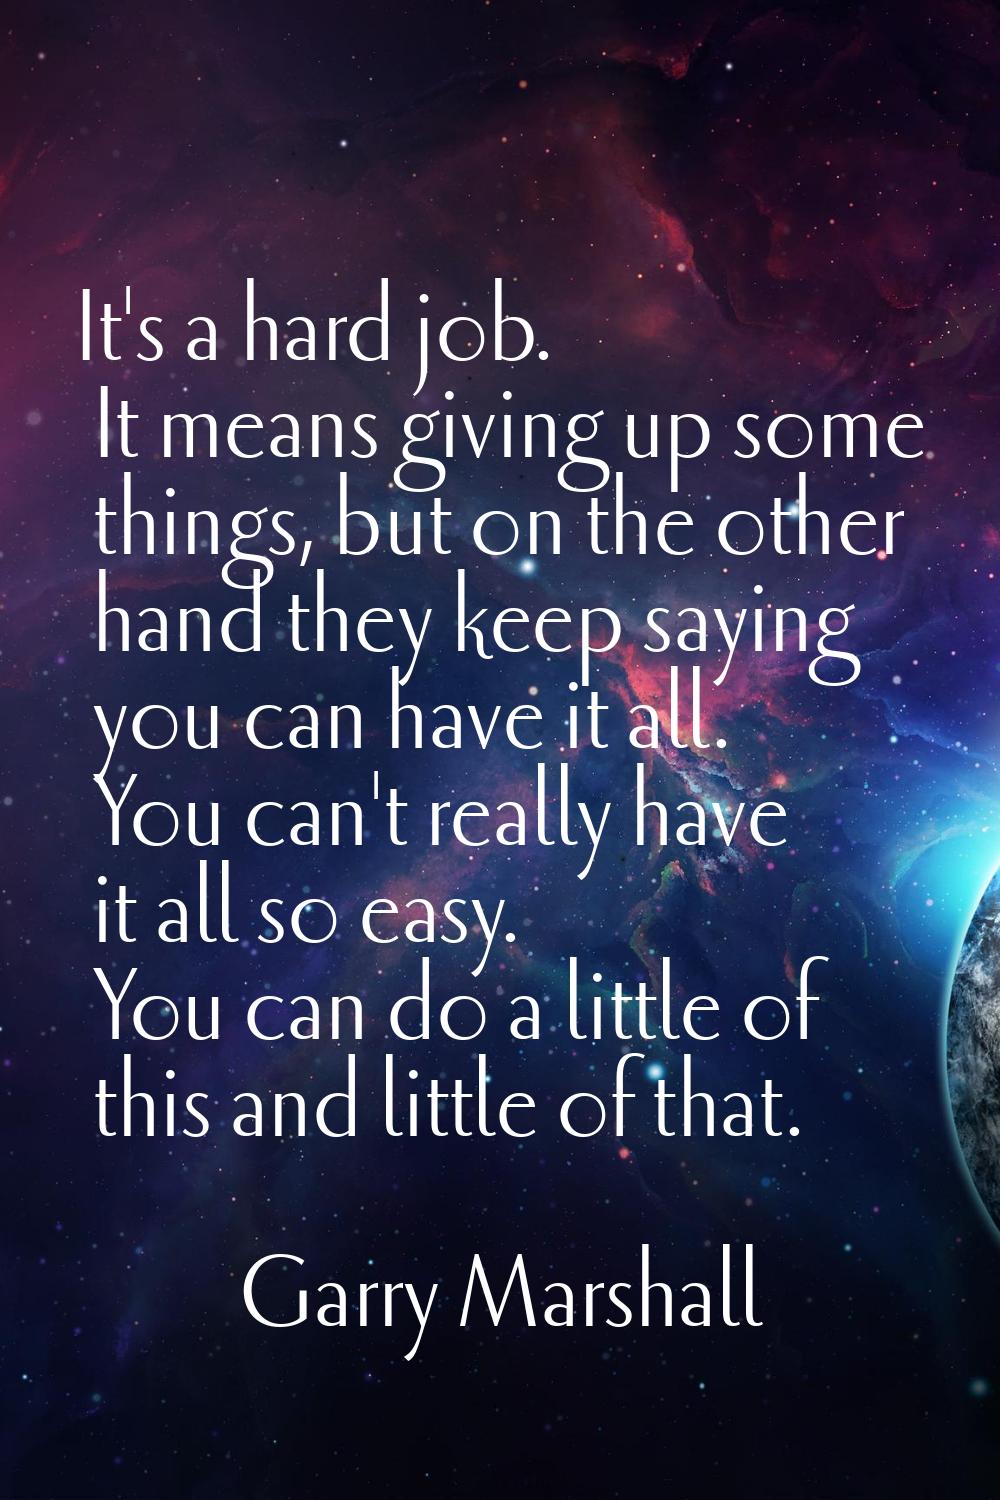 It's a hard job. It means giving up some things, but on the other hand they keep saying you can hav